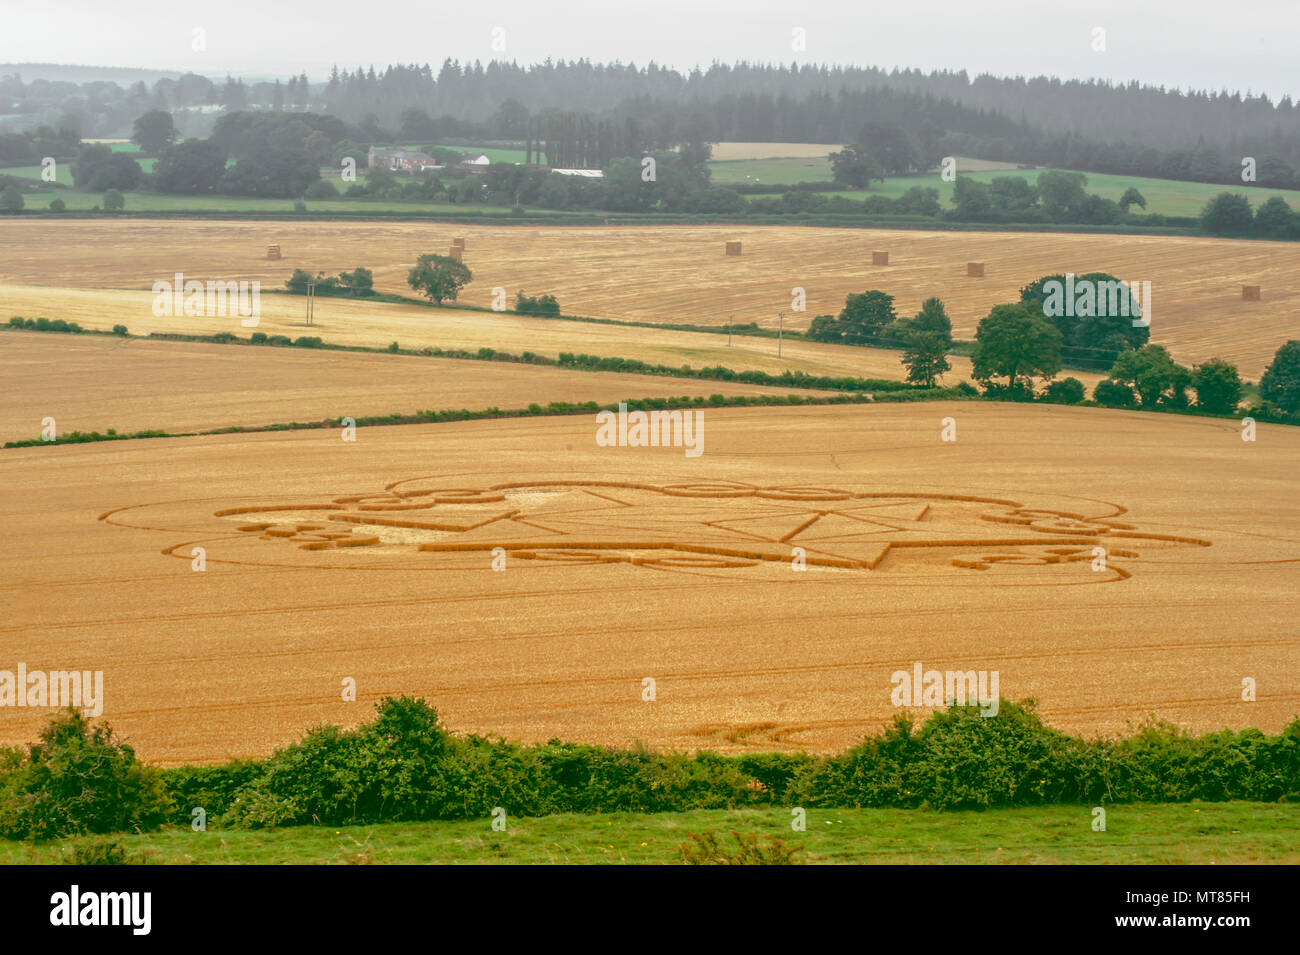 Crop Circles Wiltshire High Resolution Stock Photography and Images - Alamy Famous Crop Circle